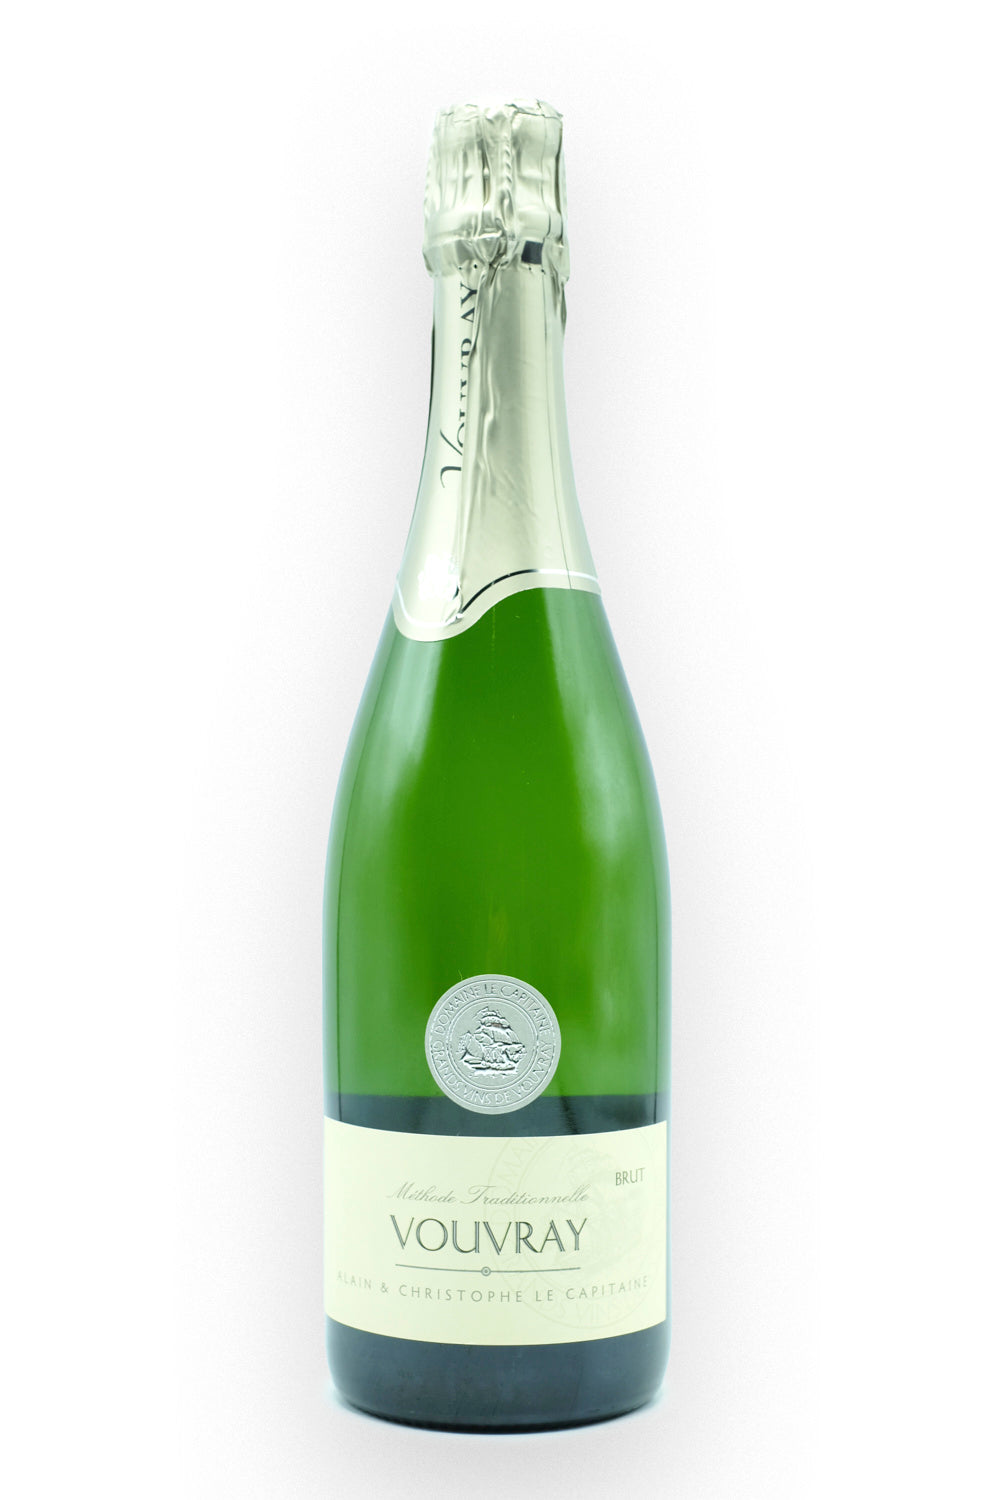 Le Capitaine Vouvray Brut